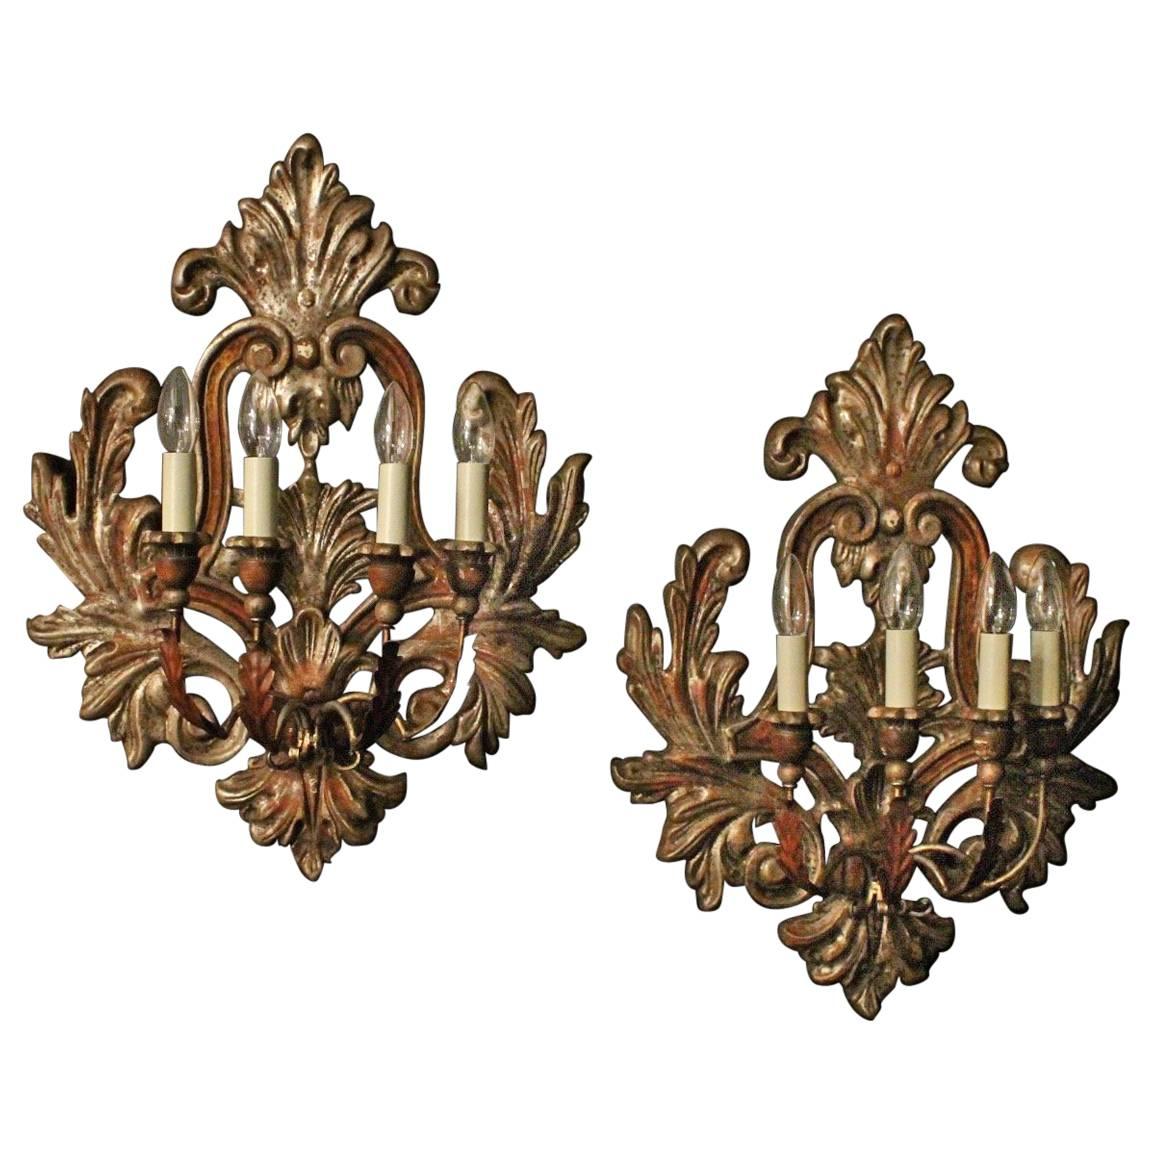 Florentine Pair of Silver Giltwood Wall Lights